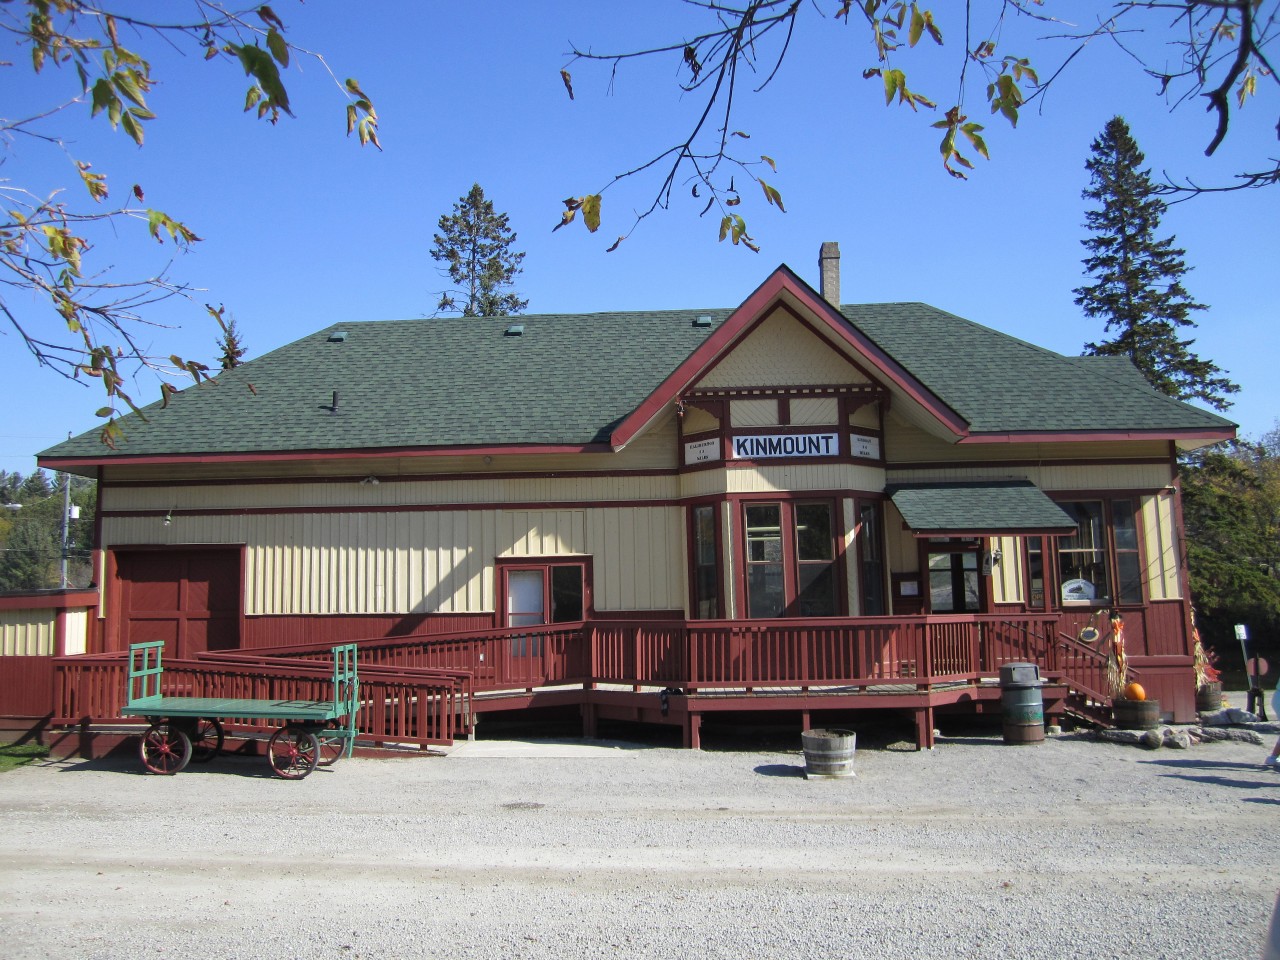 The Kinmount station in 2011.